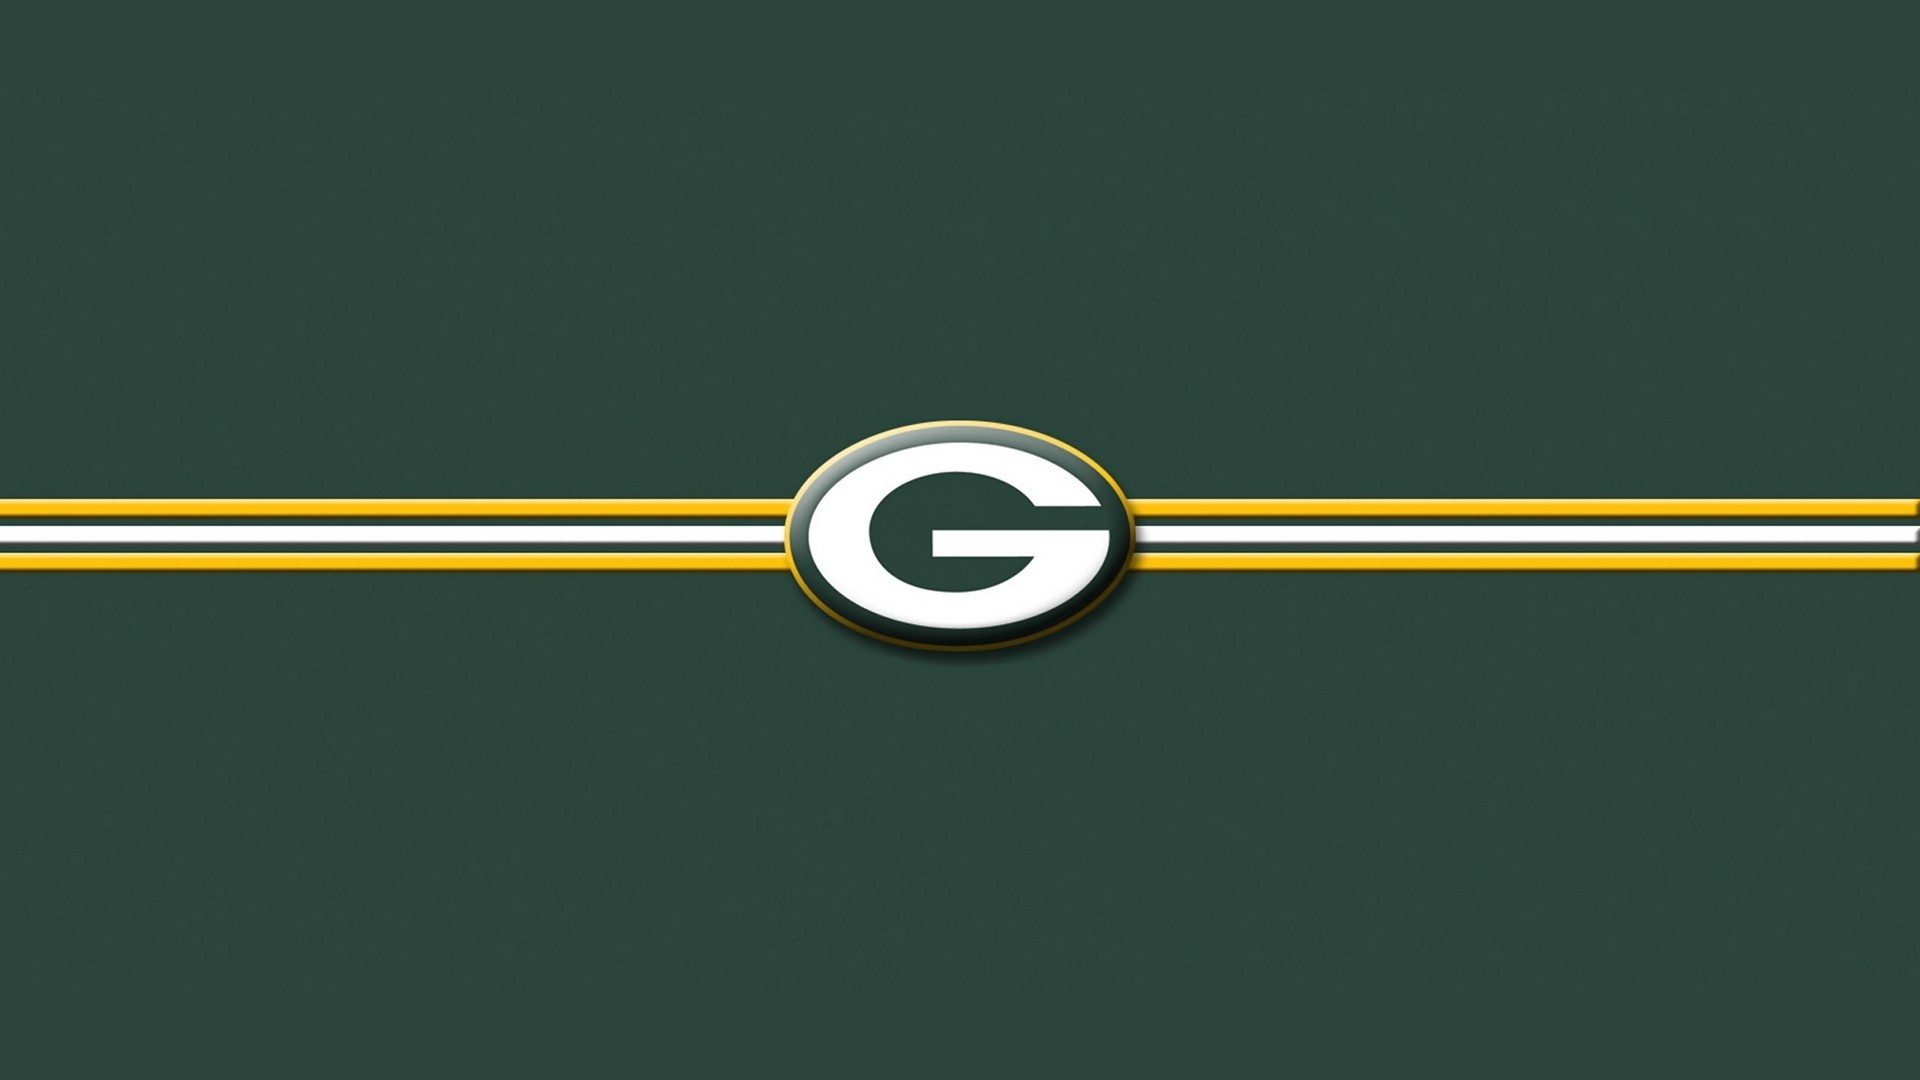 Wallpaper of Green Bay Packers With high-resolution 1920X1080 pixel. You can use and set as wallpaper for Notebook Screensavers, Mac Wallpapers, Mobile Home Screen, iPhone or Android Phones Lock Screen